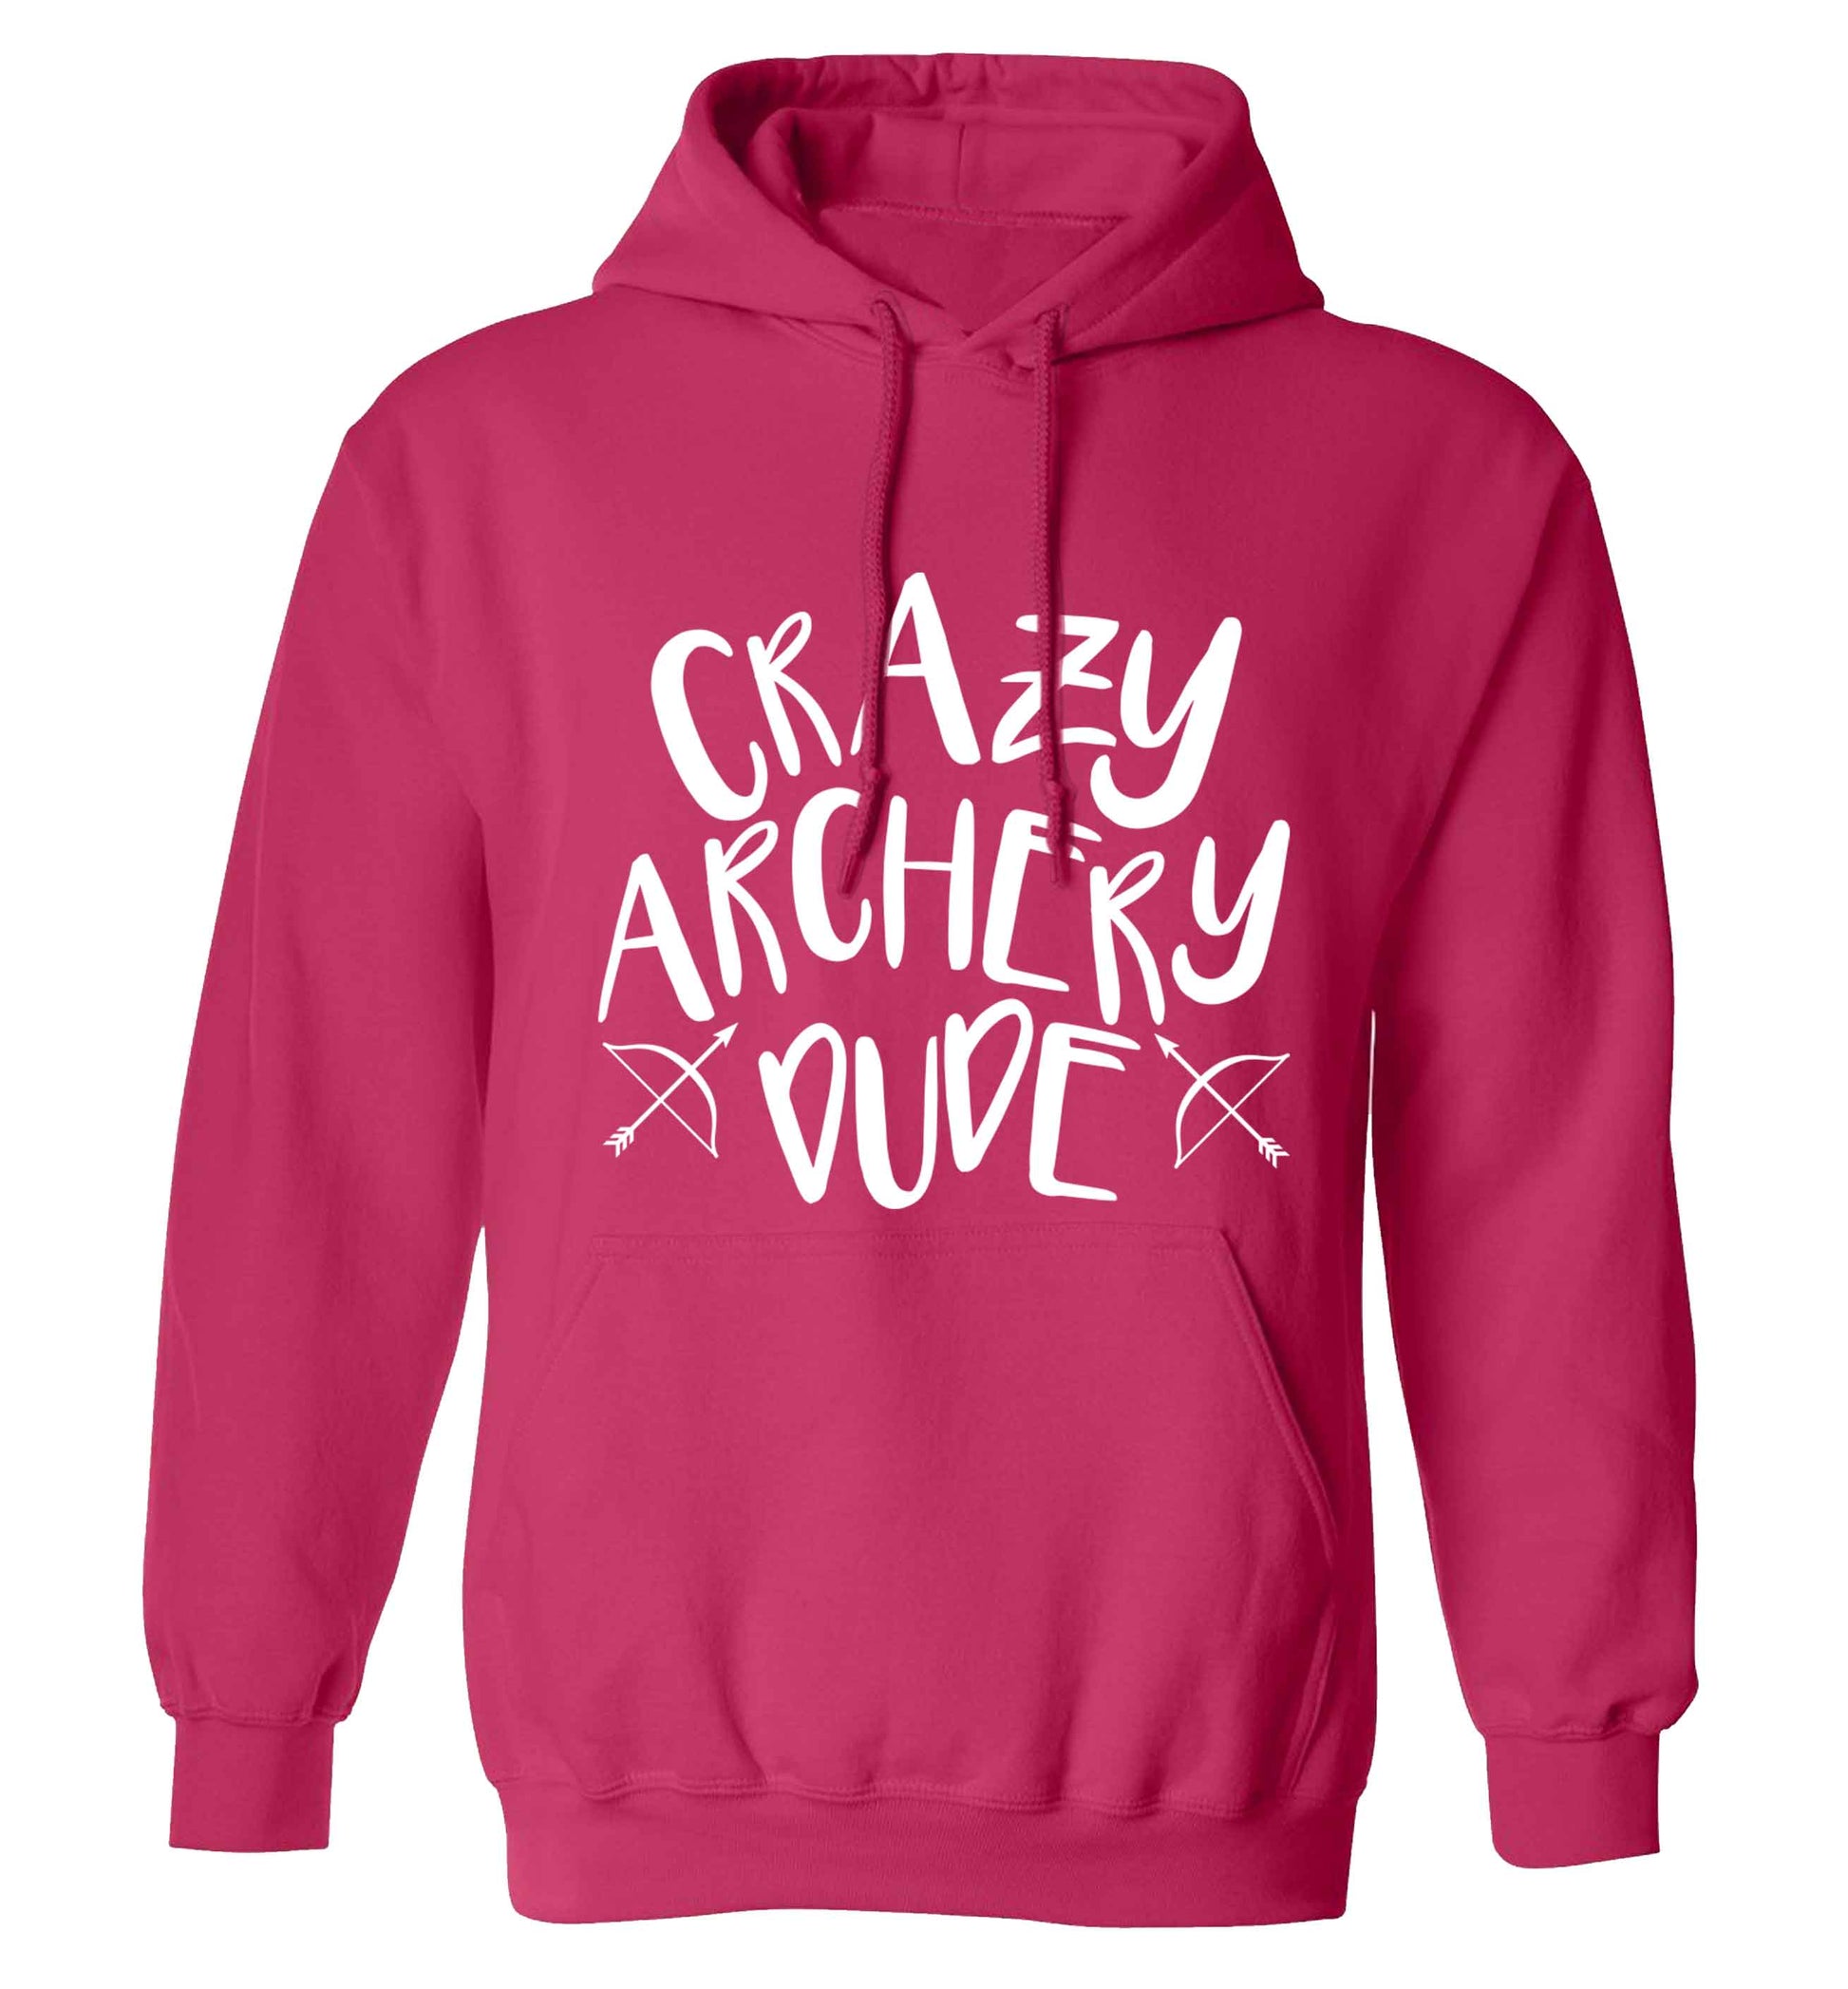 Crazy archery dude adults unisex pink hoodie 2XL